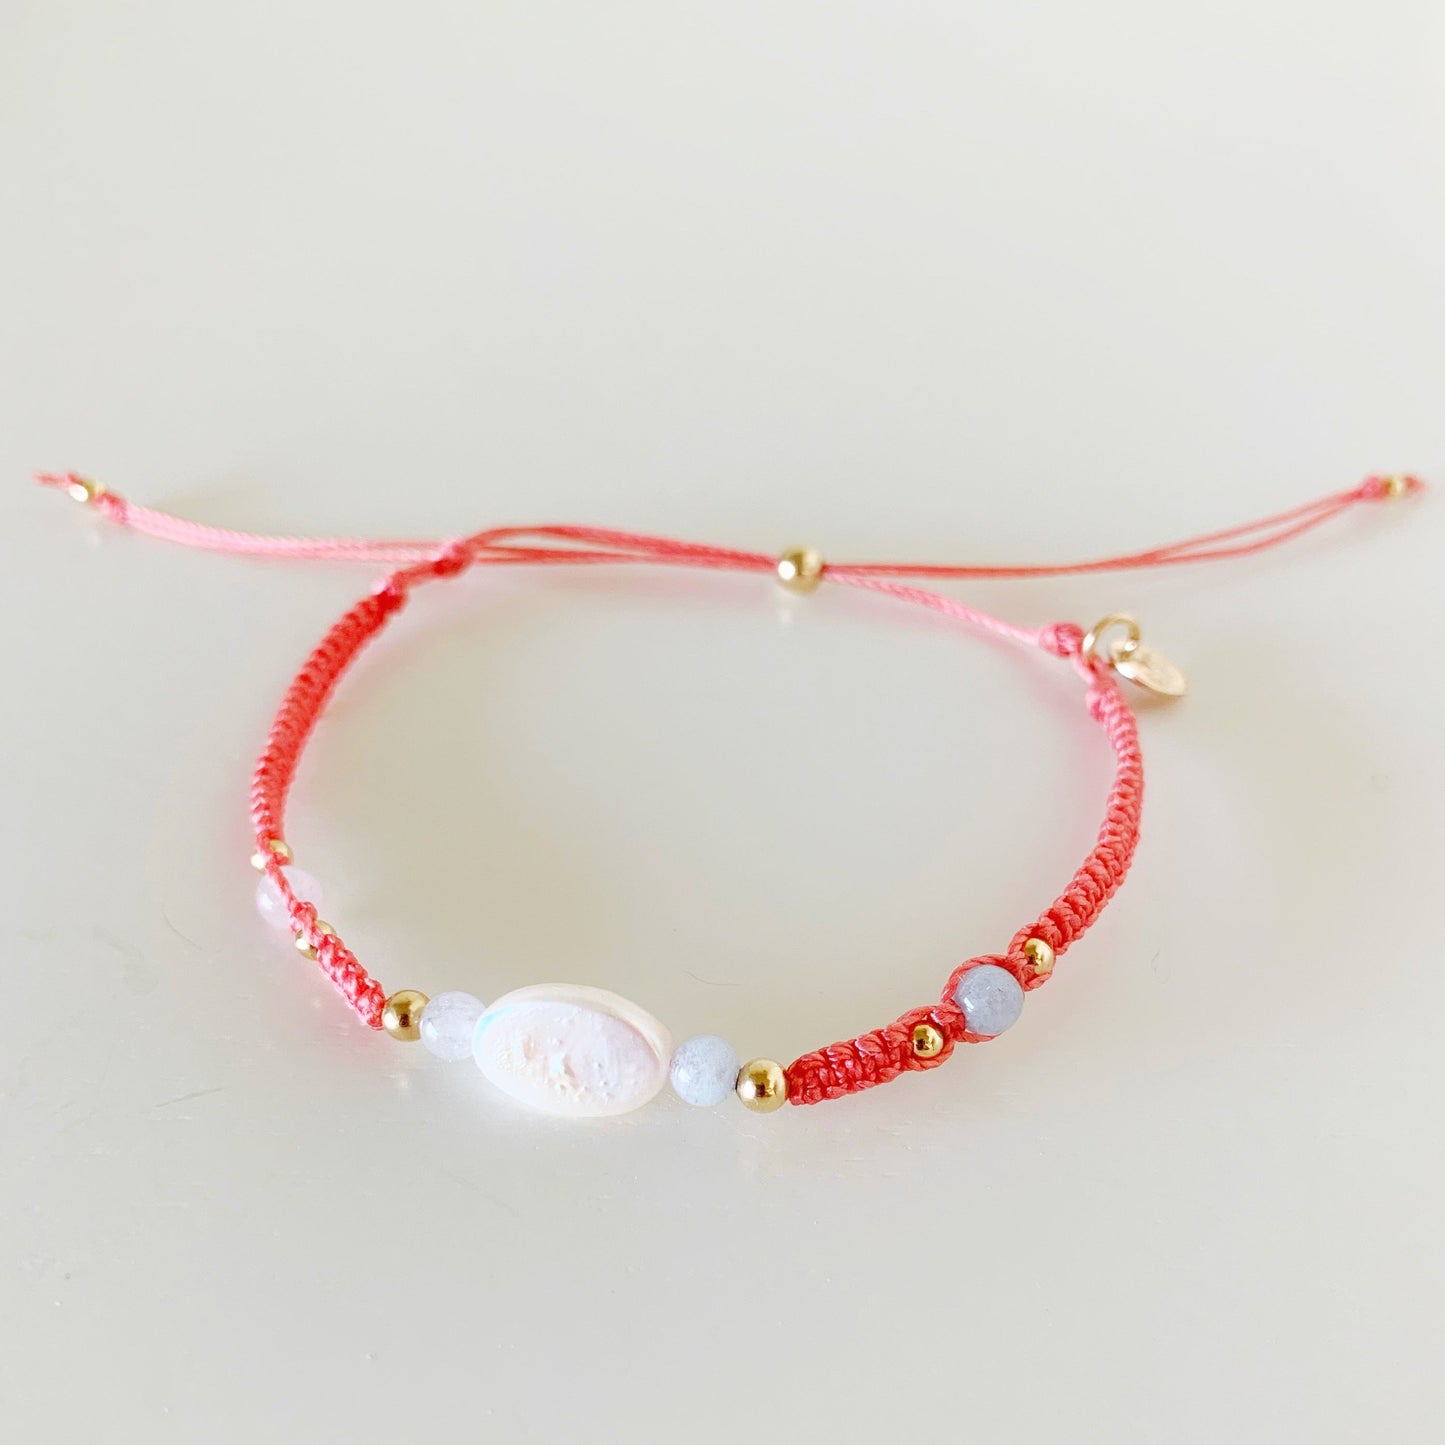 the kinda crabby bracelet by mermaids and madeleines is an adjustable macrame style bracelet created with terra cotta color cord with a freshwater oval pearl in the center with 4mm aquamarine beads on either side. this bracelet is photographed from the front on a white surface